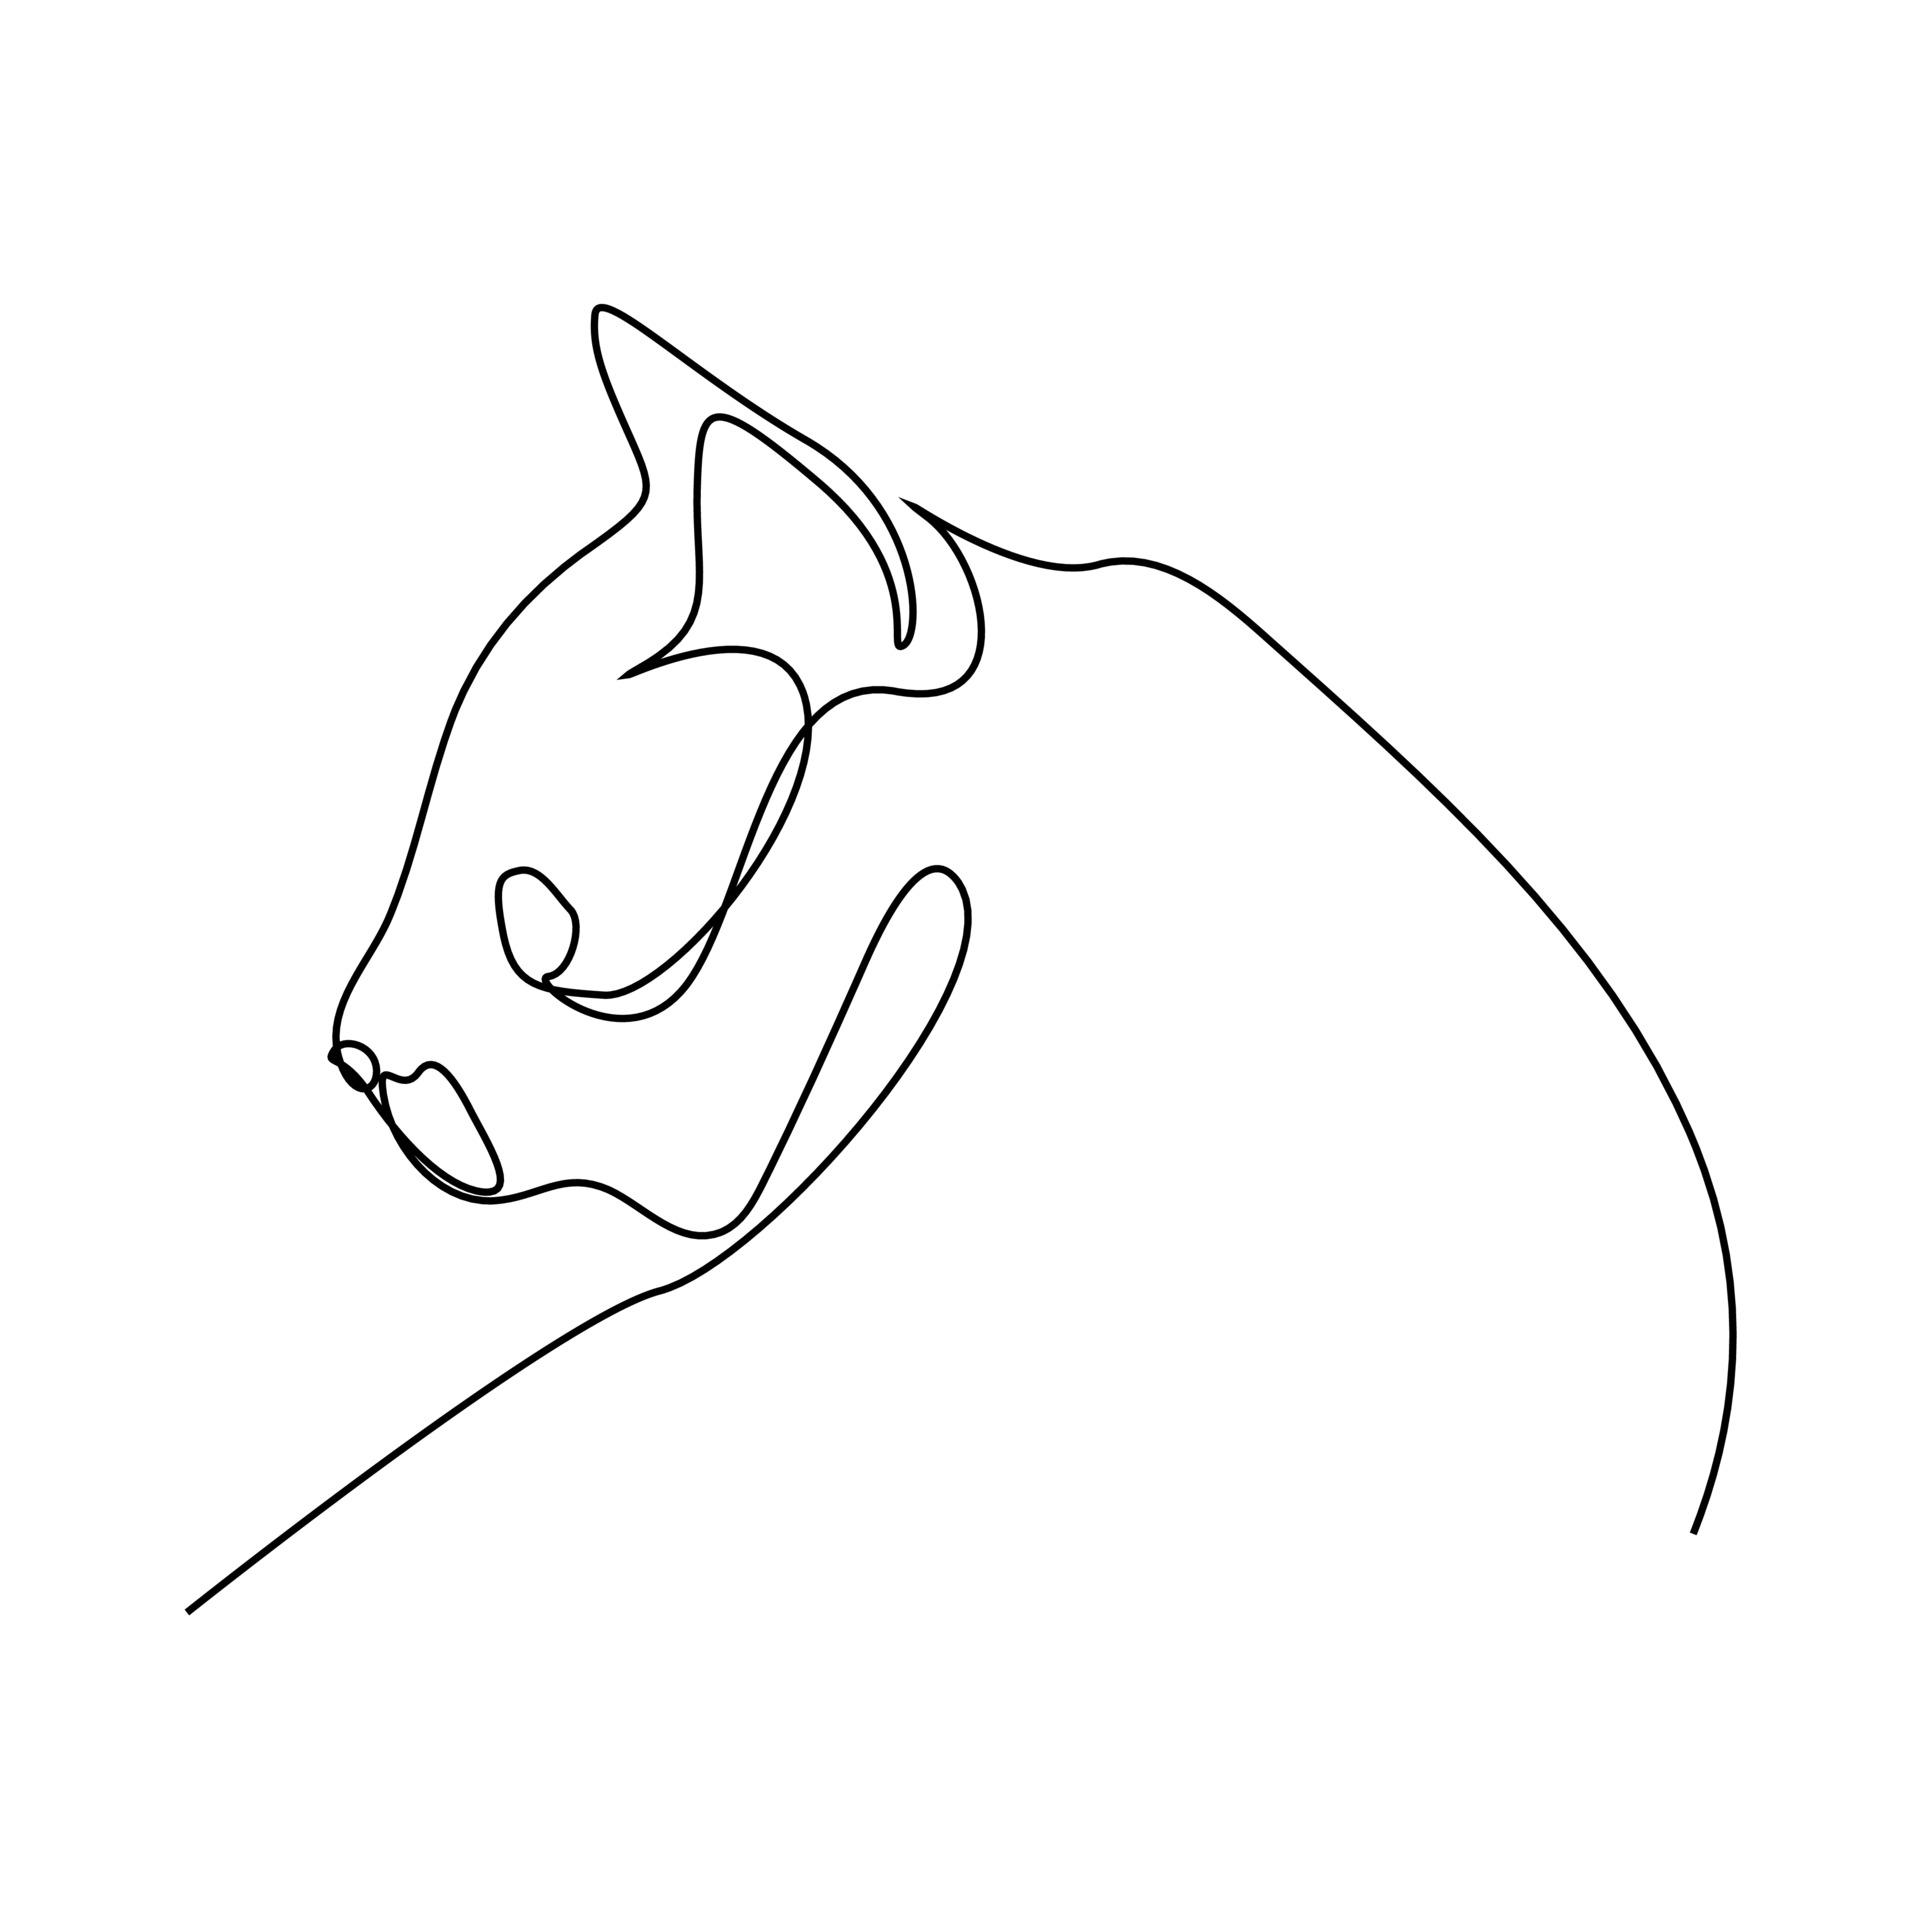 A minimalistic line art logo of an anime cat within a wave in a